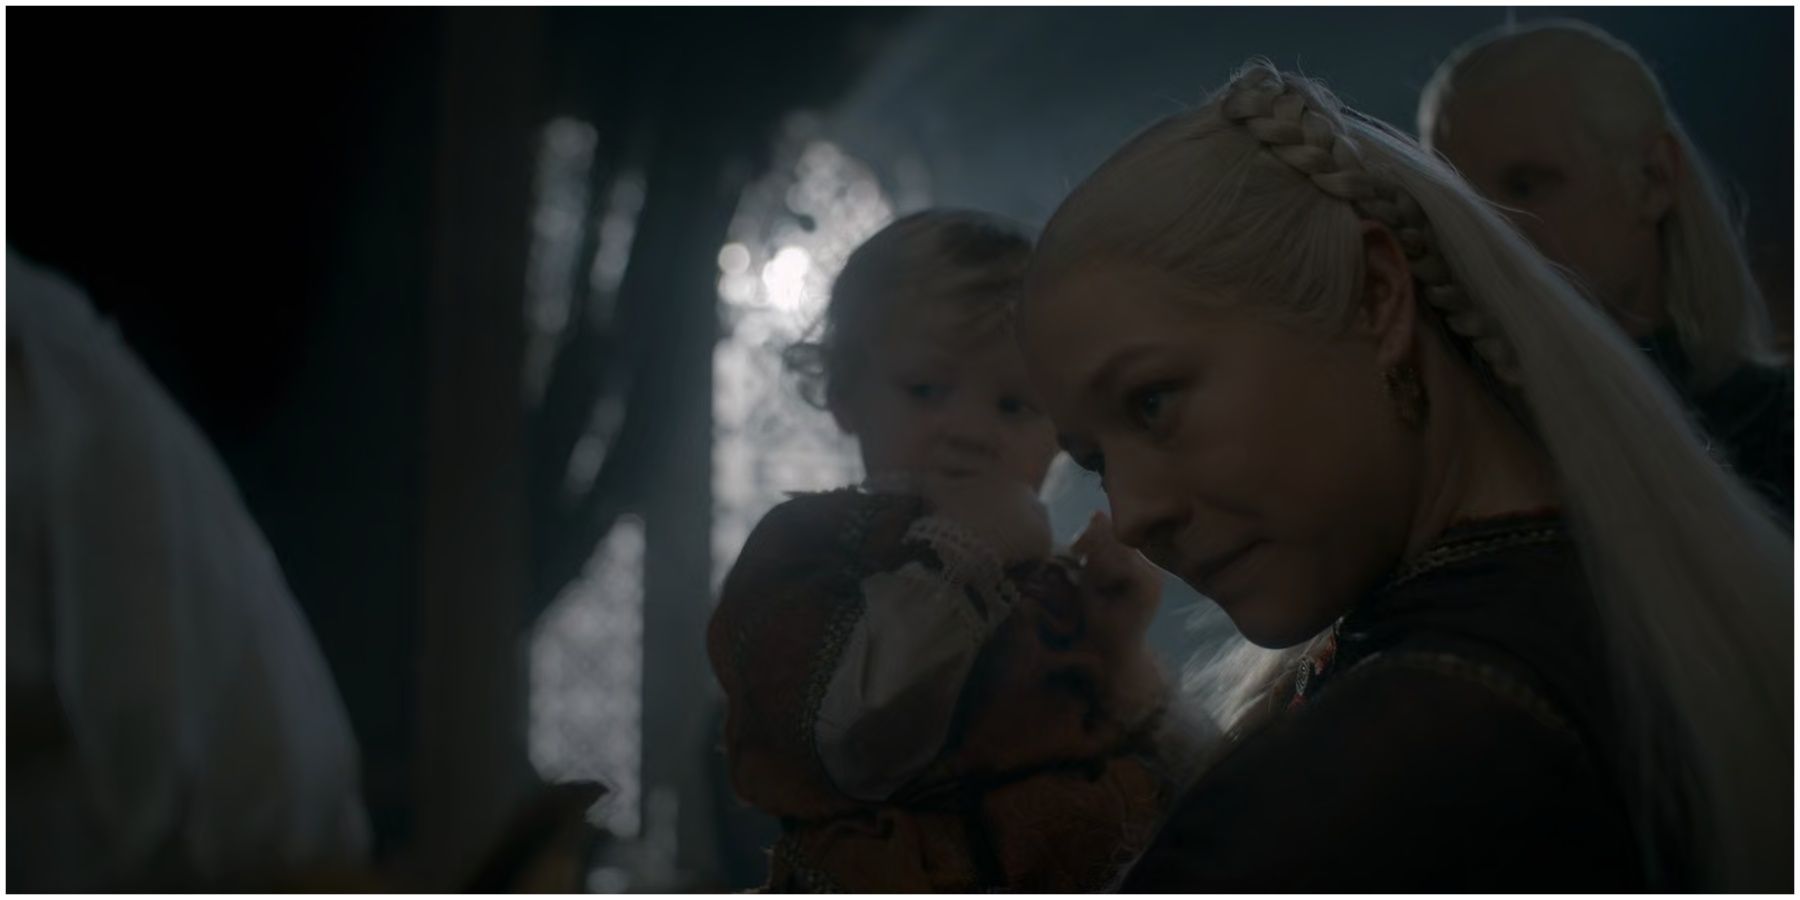 Rhaenyra holding Prince Viserys in House of the Dragon.